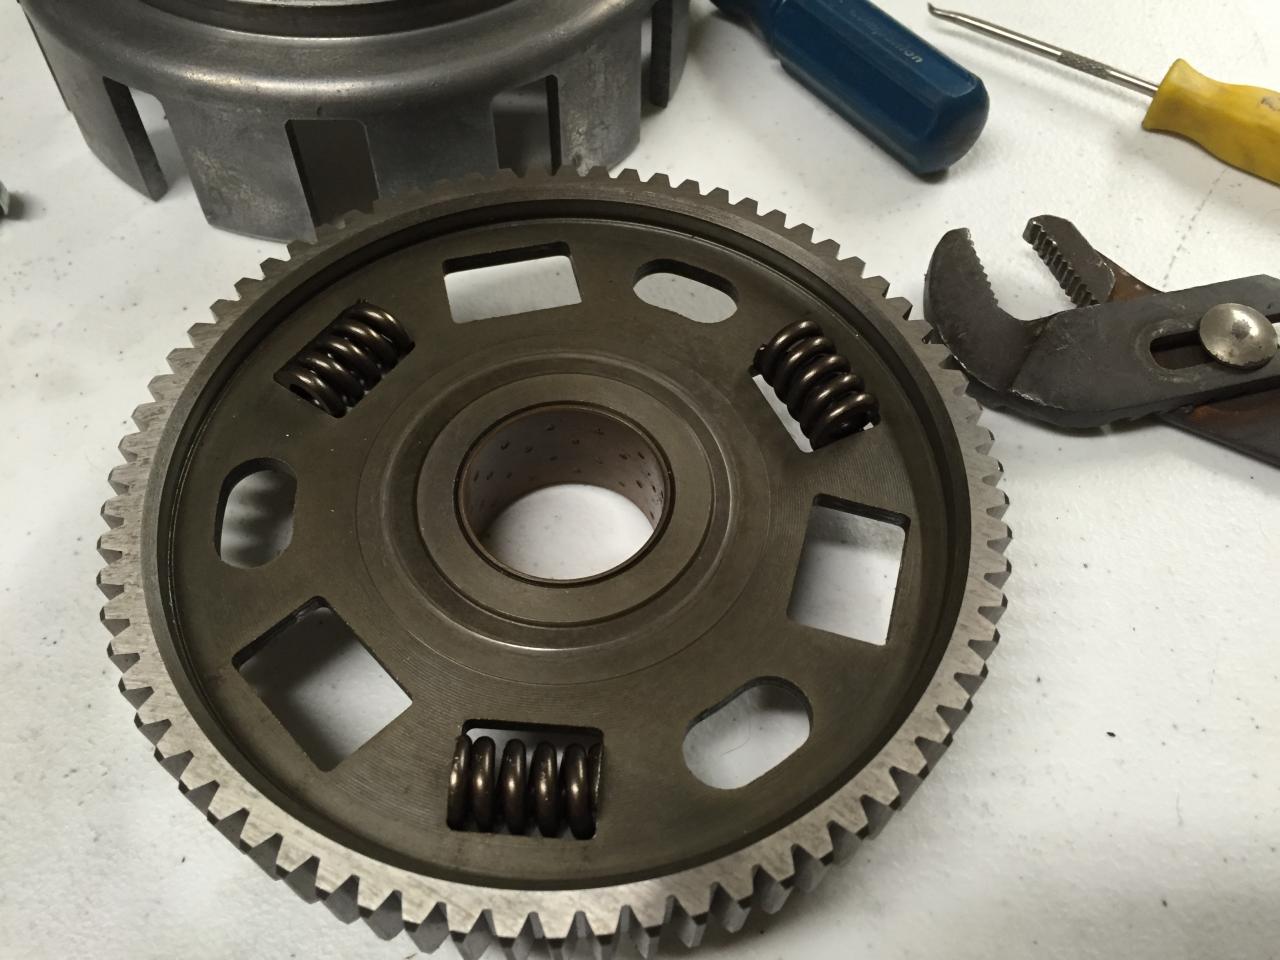 IMG 32- Primary Drive Gear, flipped over to show spring placement.